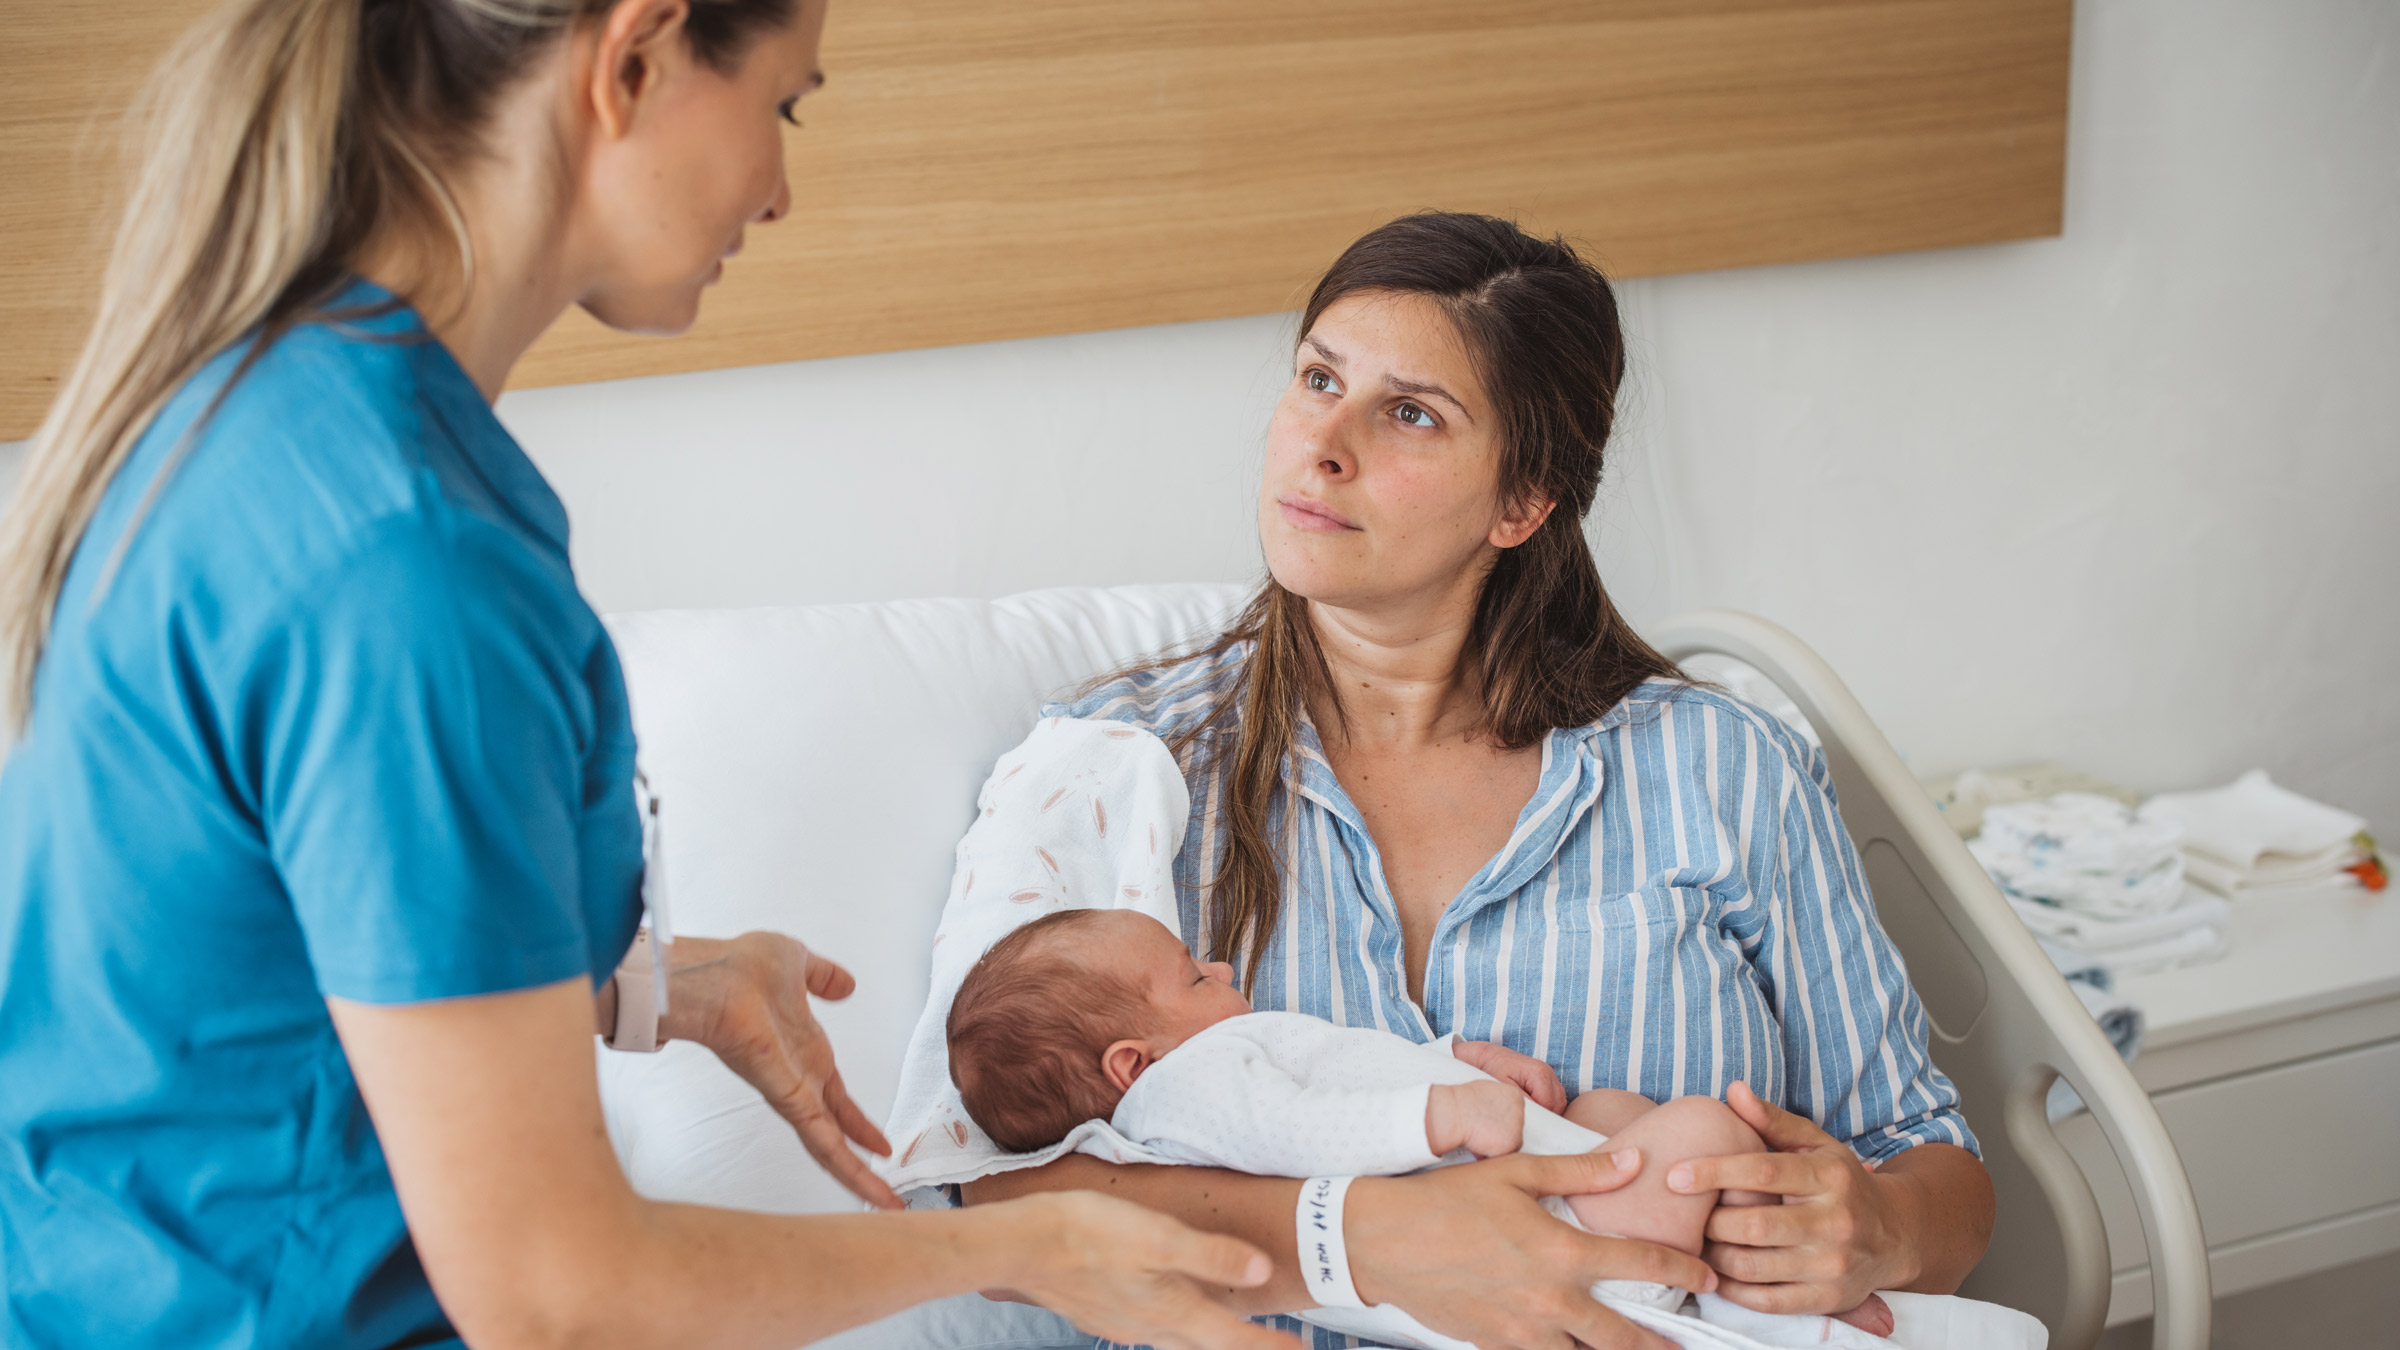 Health costs associated with pregnancy, childbirth, and postpartum